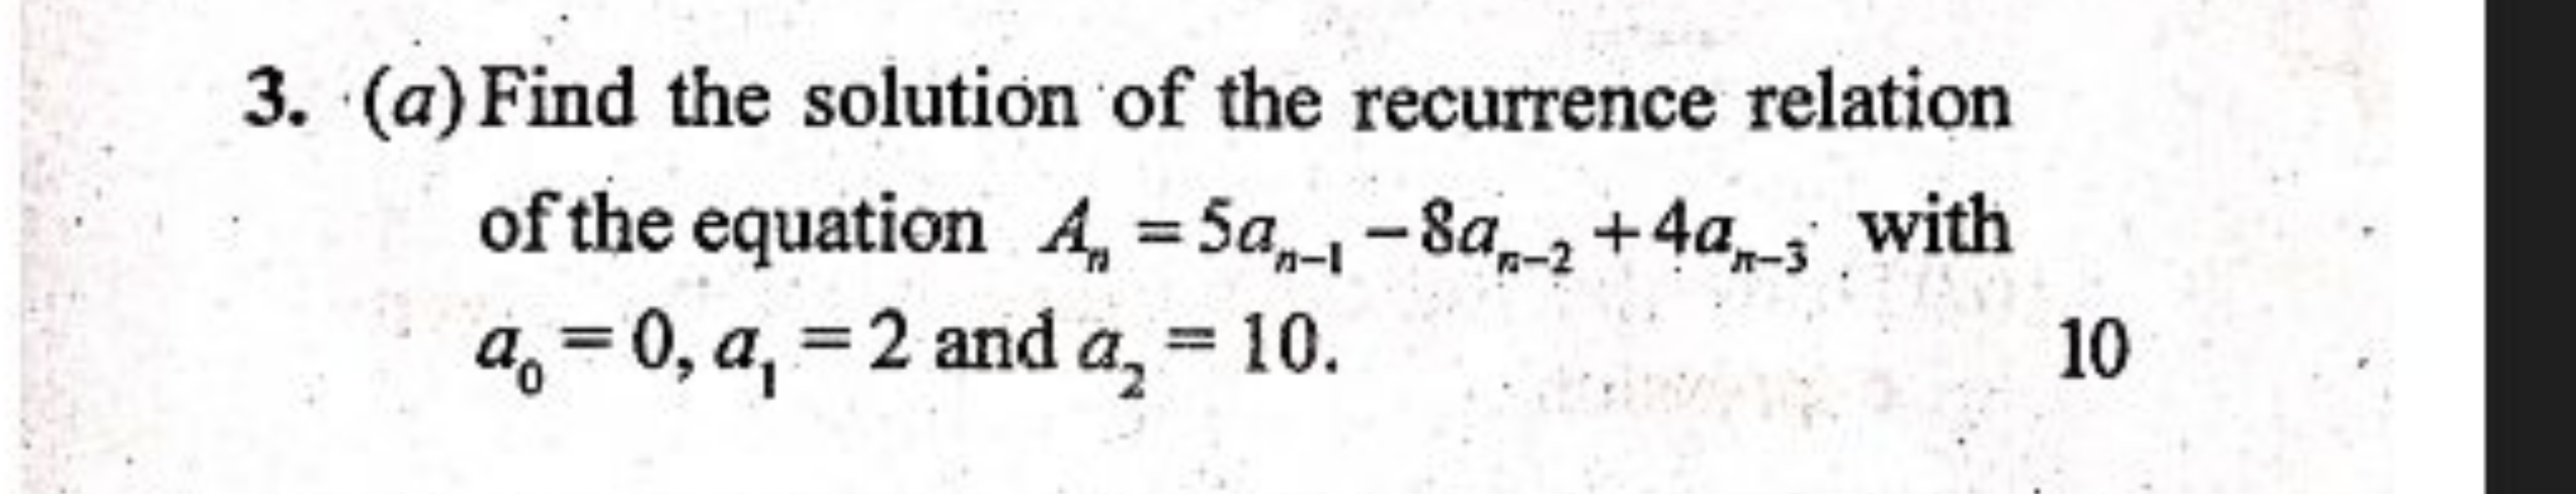 3. (a) Find the solution of the recurrence relation of the equation An